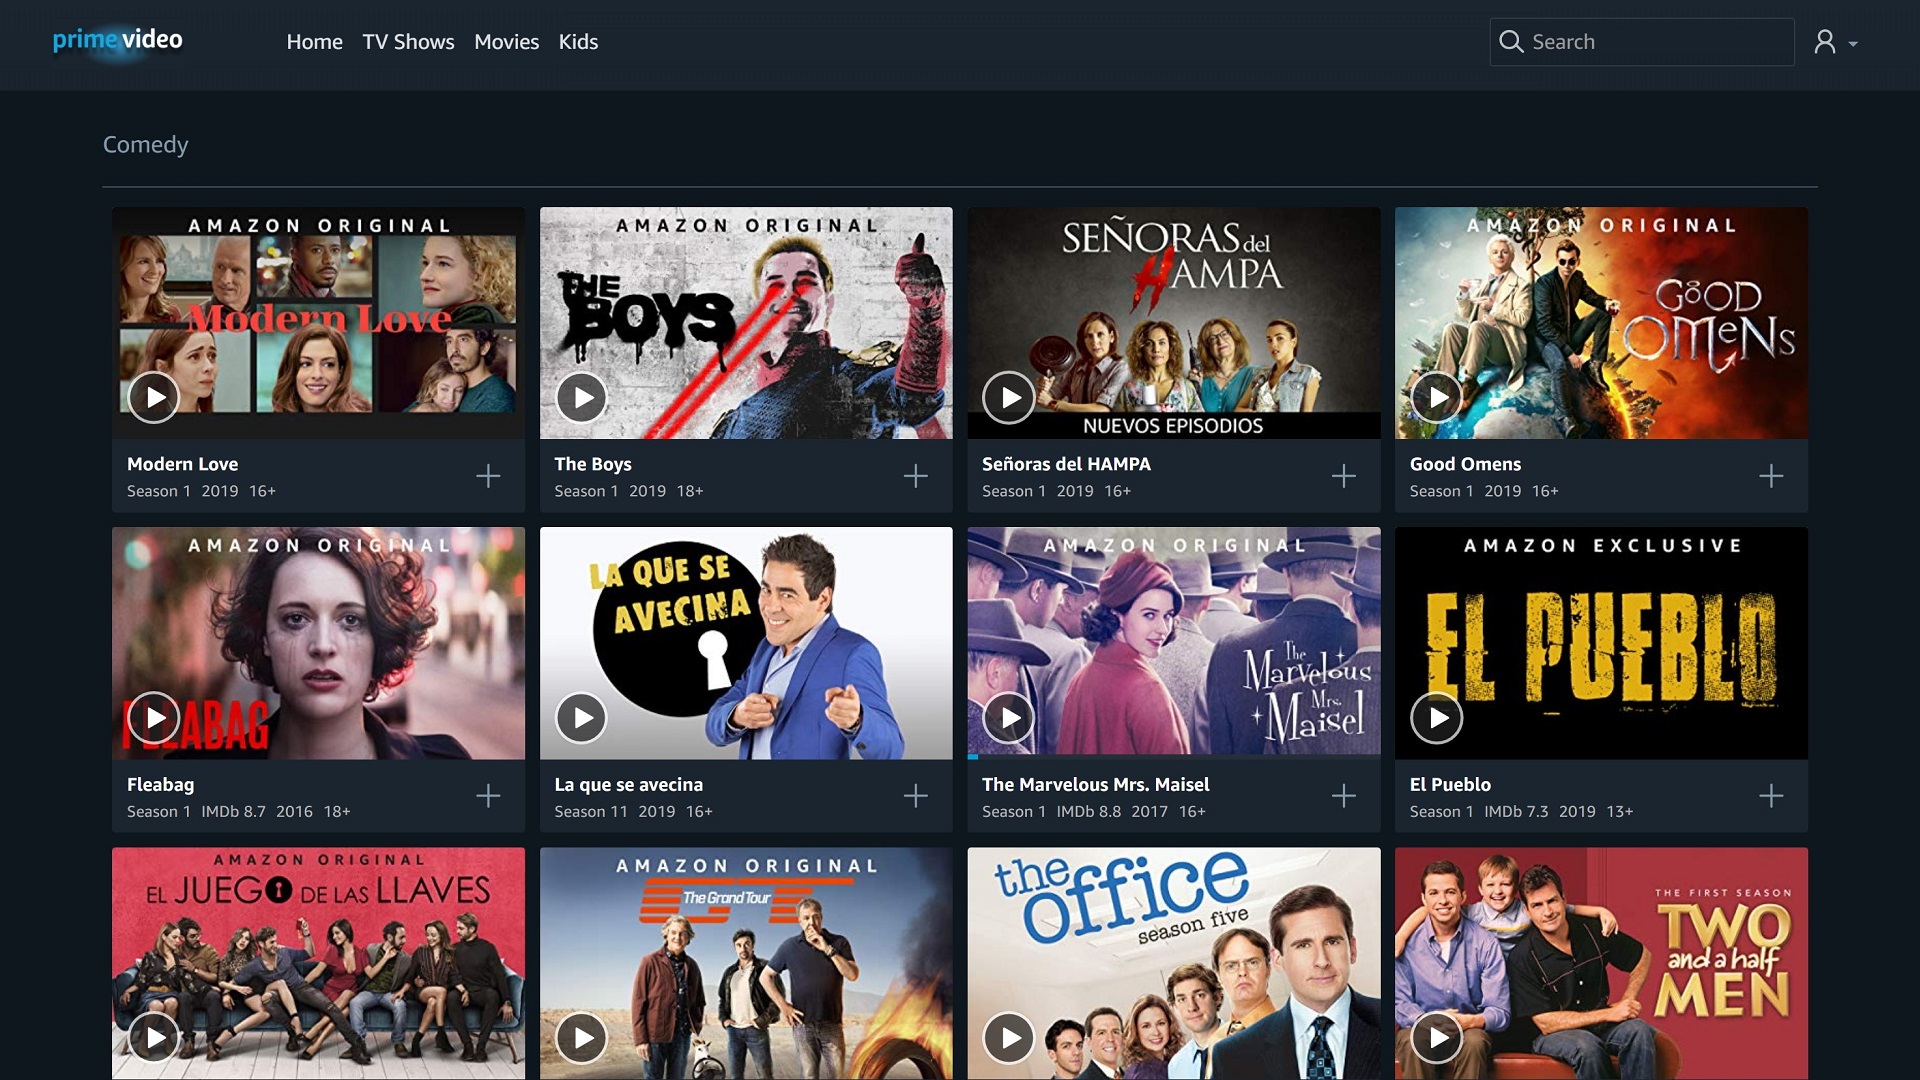 best-comedies-on-amazon-prime-video-featured.jpg